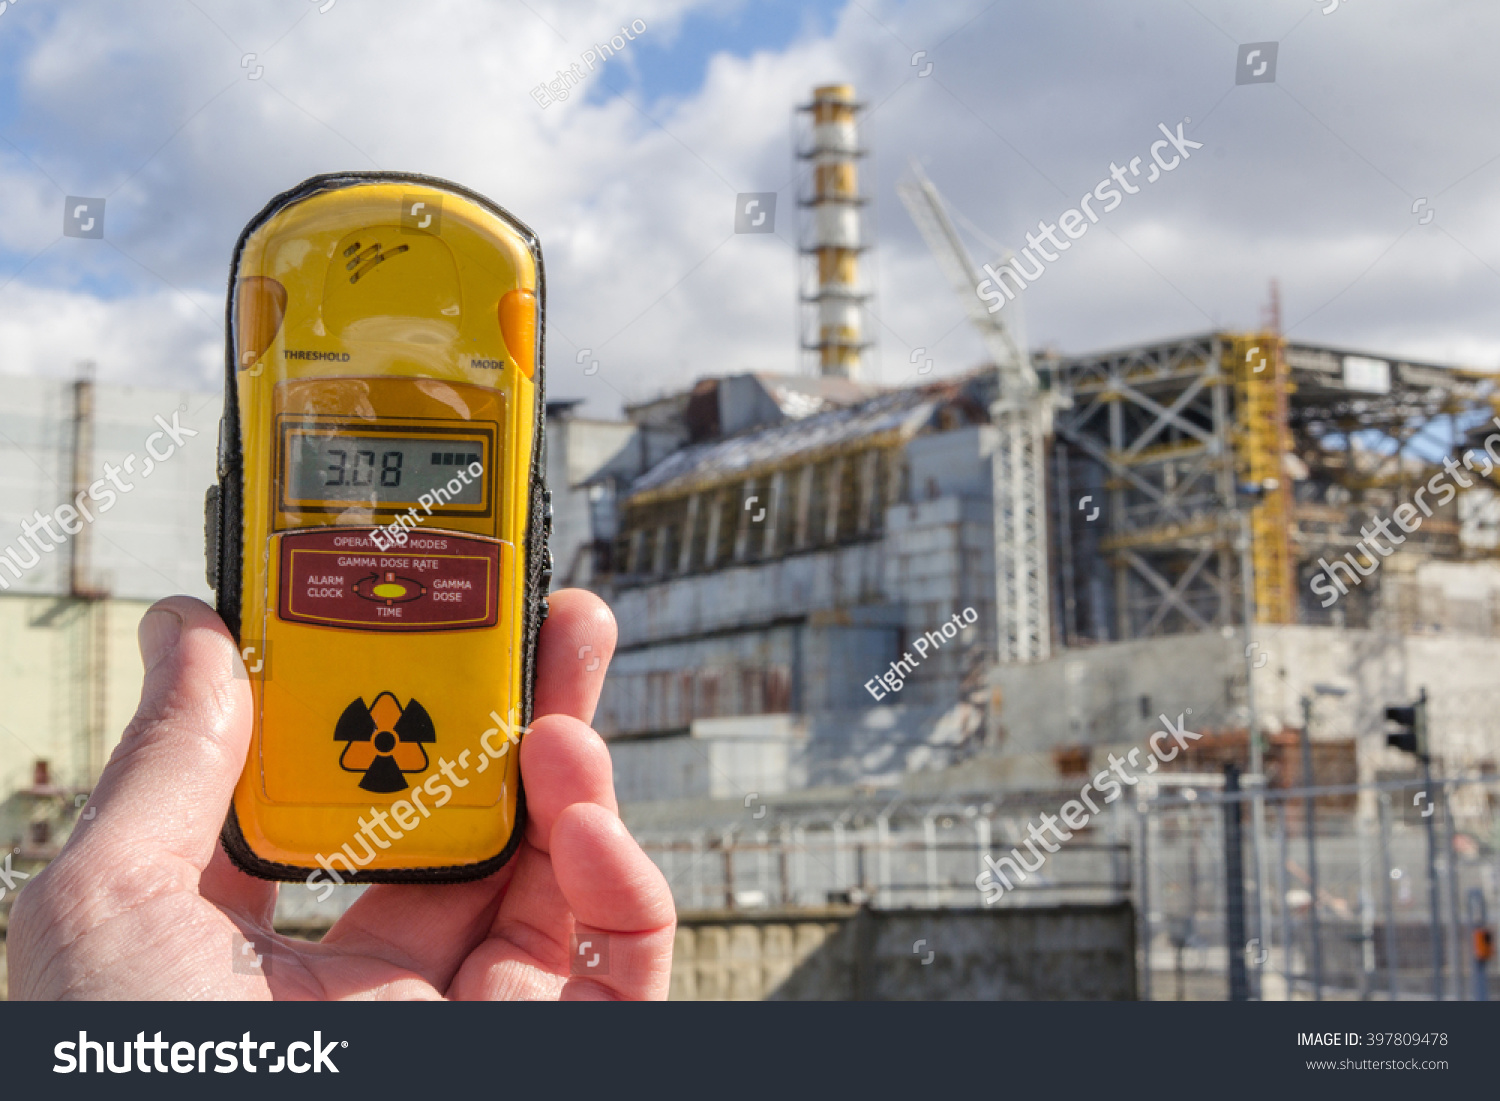 UKRAINE. Chernobyl Exclusion Zone. - 2016.03.19. Dosimeter and Nuclear Power Plant on the background #397809478